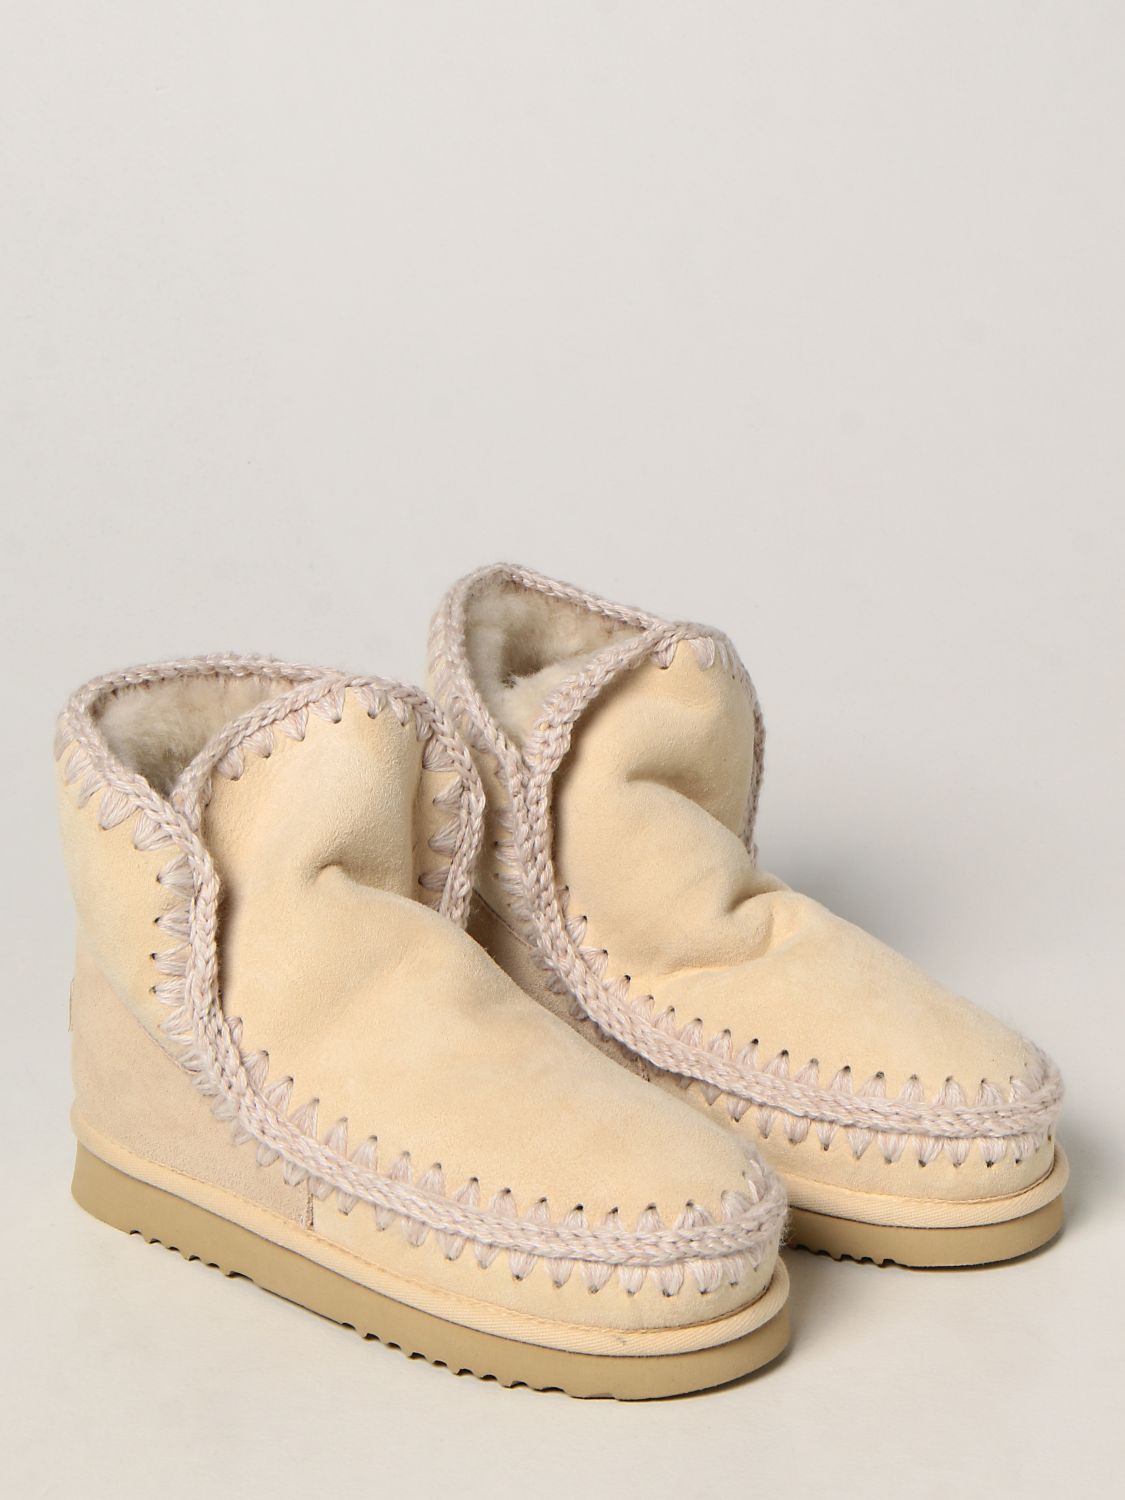 Flat ankle boots Mou: Shoes women Mou yellow cream 2